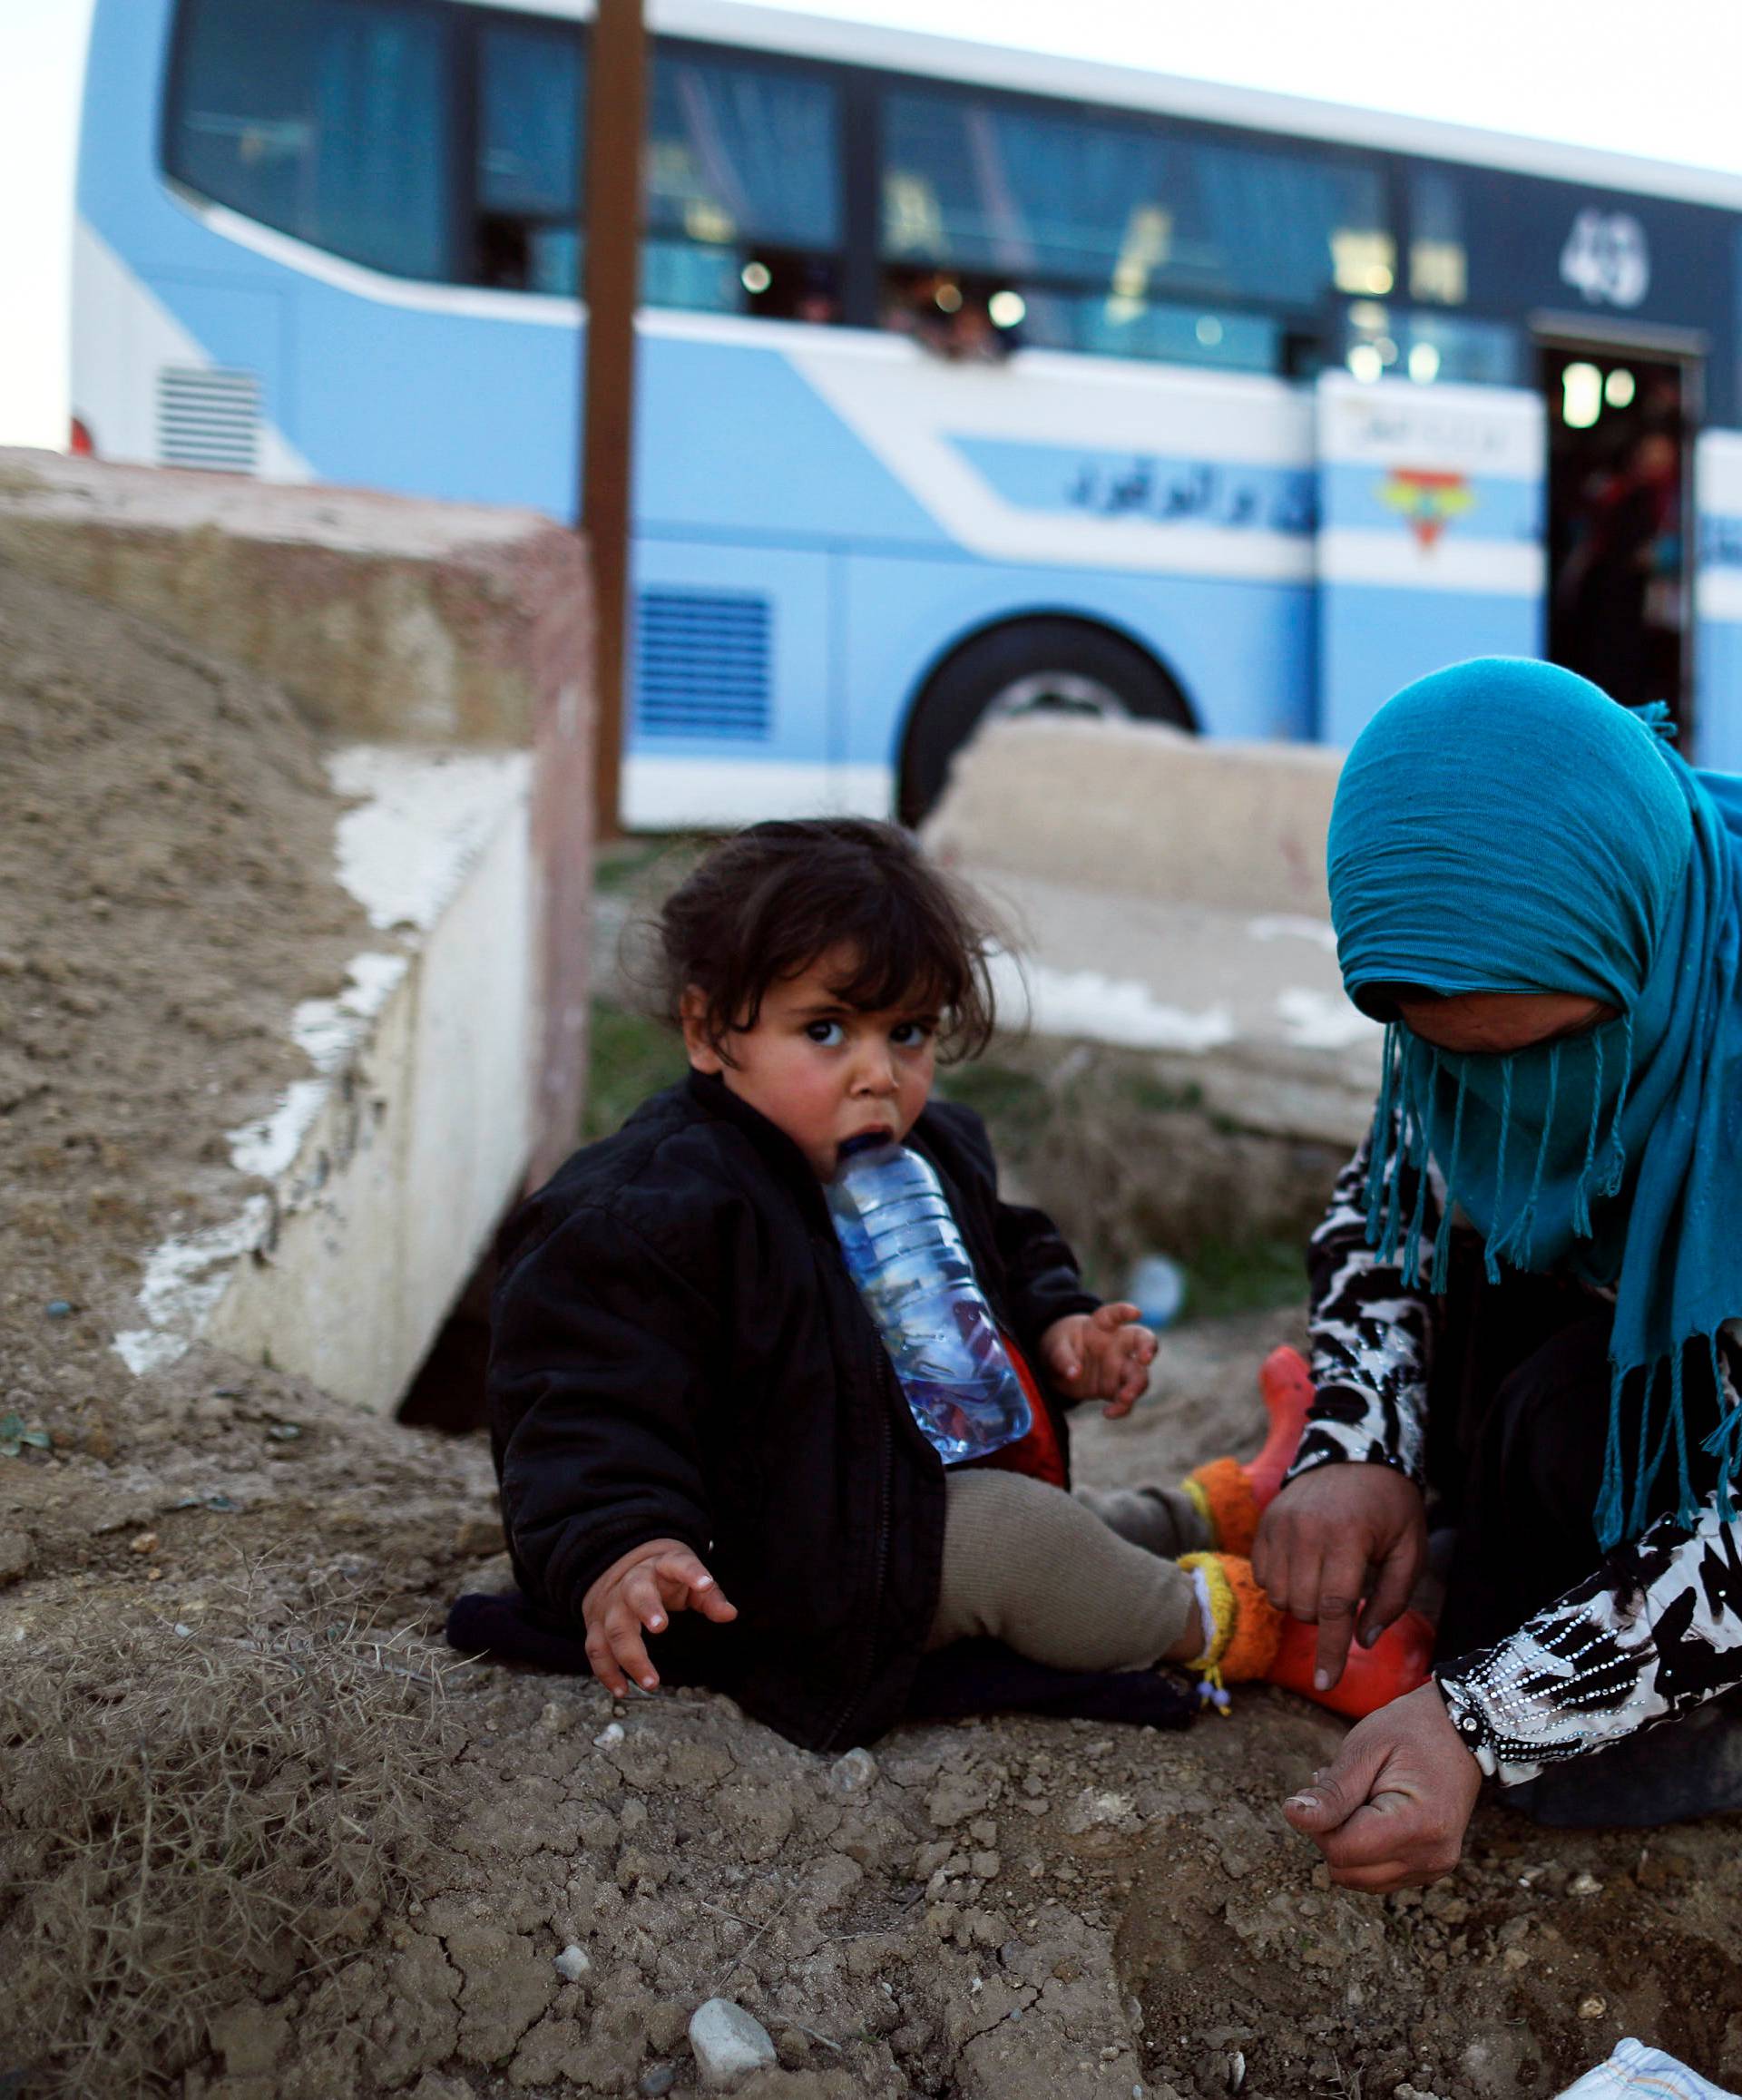 A woman, who just fled a village controled by Islamic State militants, checks her daughter as she sits in front of a bus before heading to the camp at Hammam Ali, south of Mosul